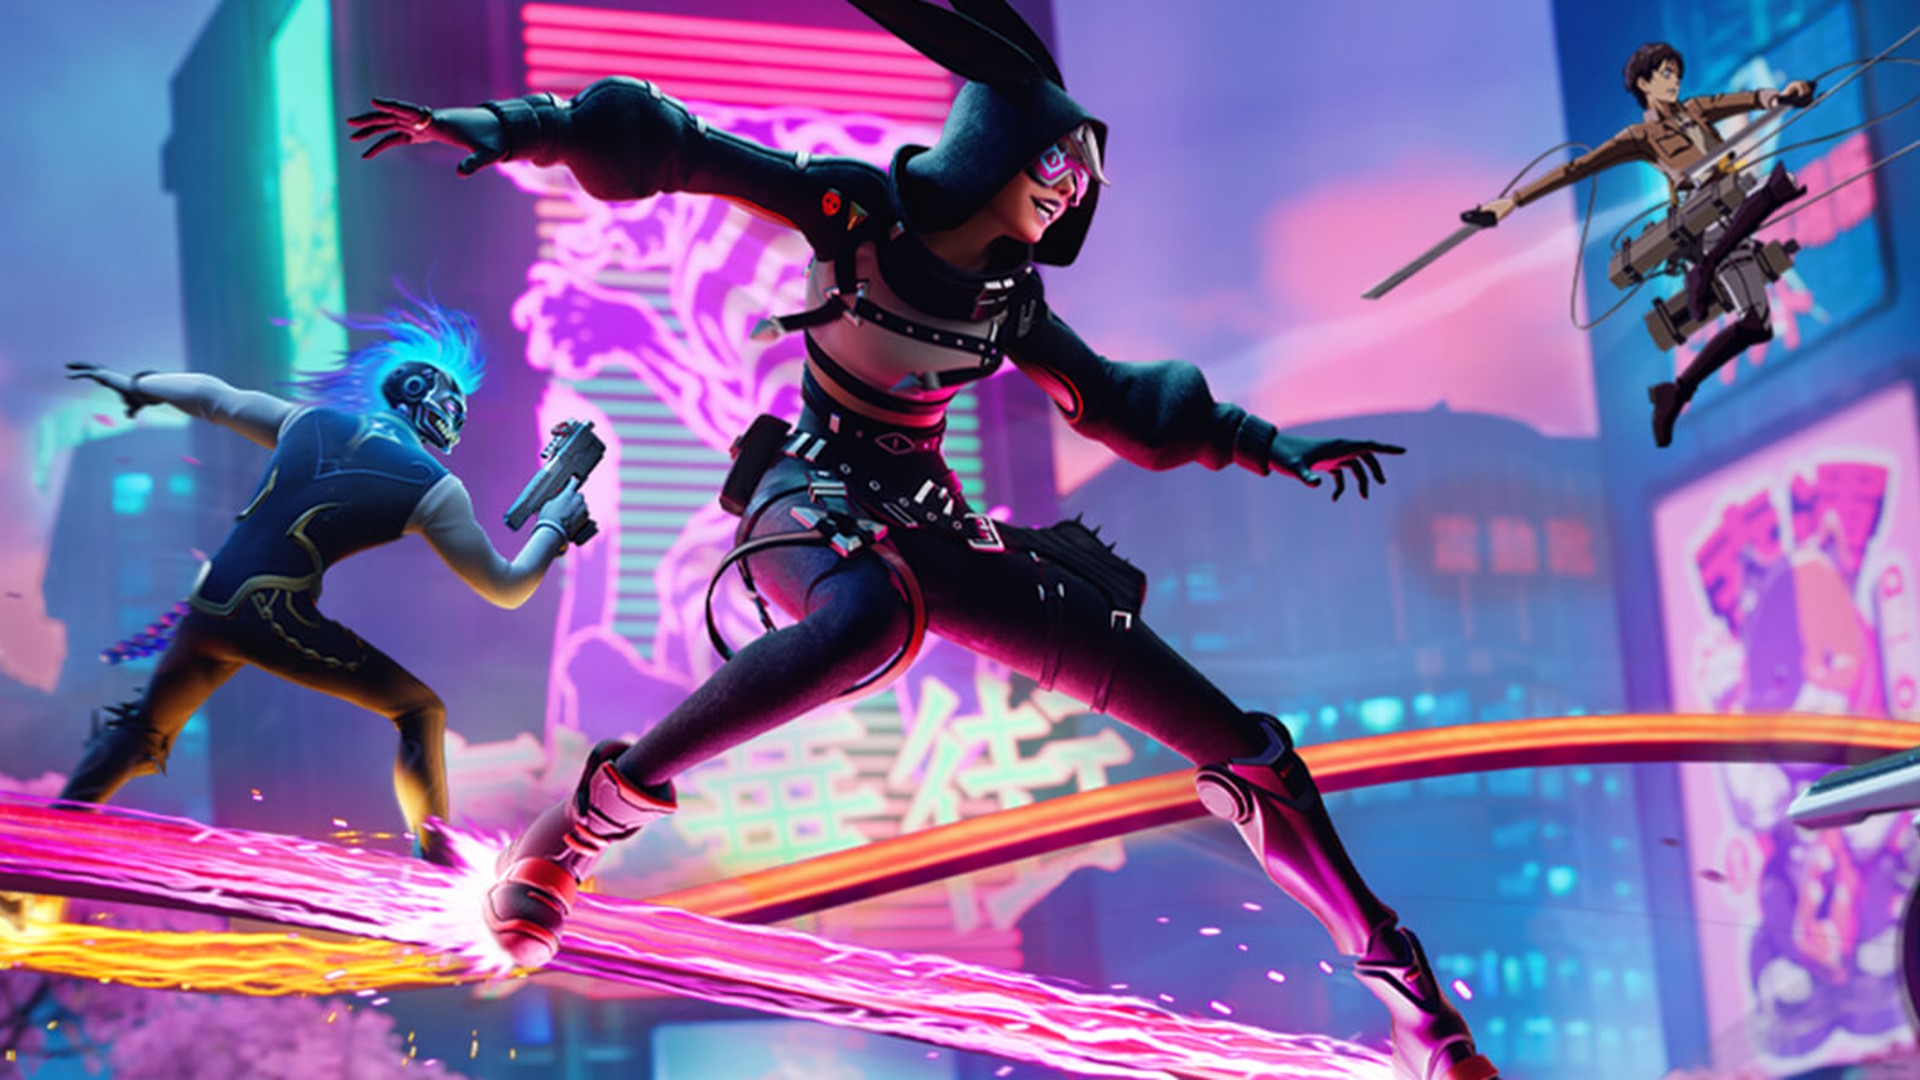 epic removes the item rarity system from fortnite but some fans ain't happy, and think it's 'trying to gouge players'